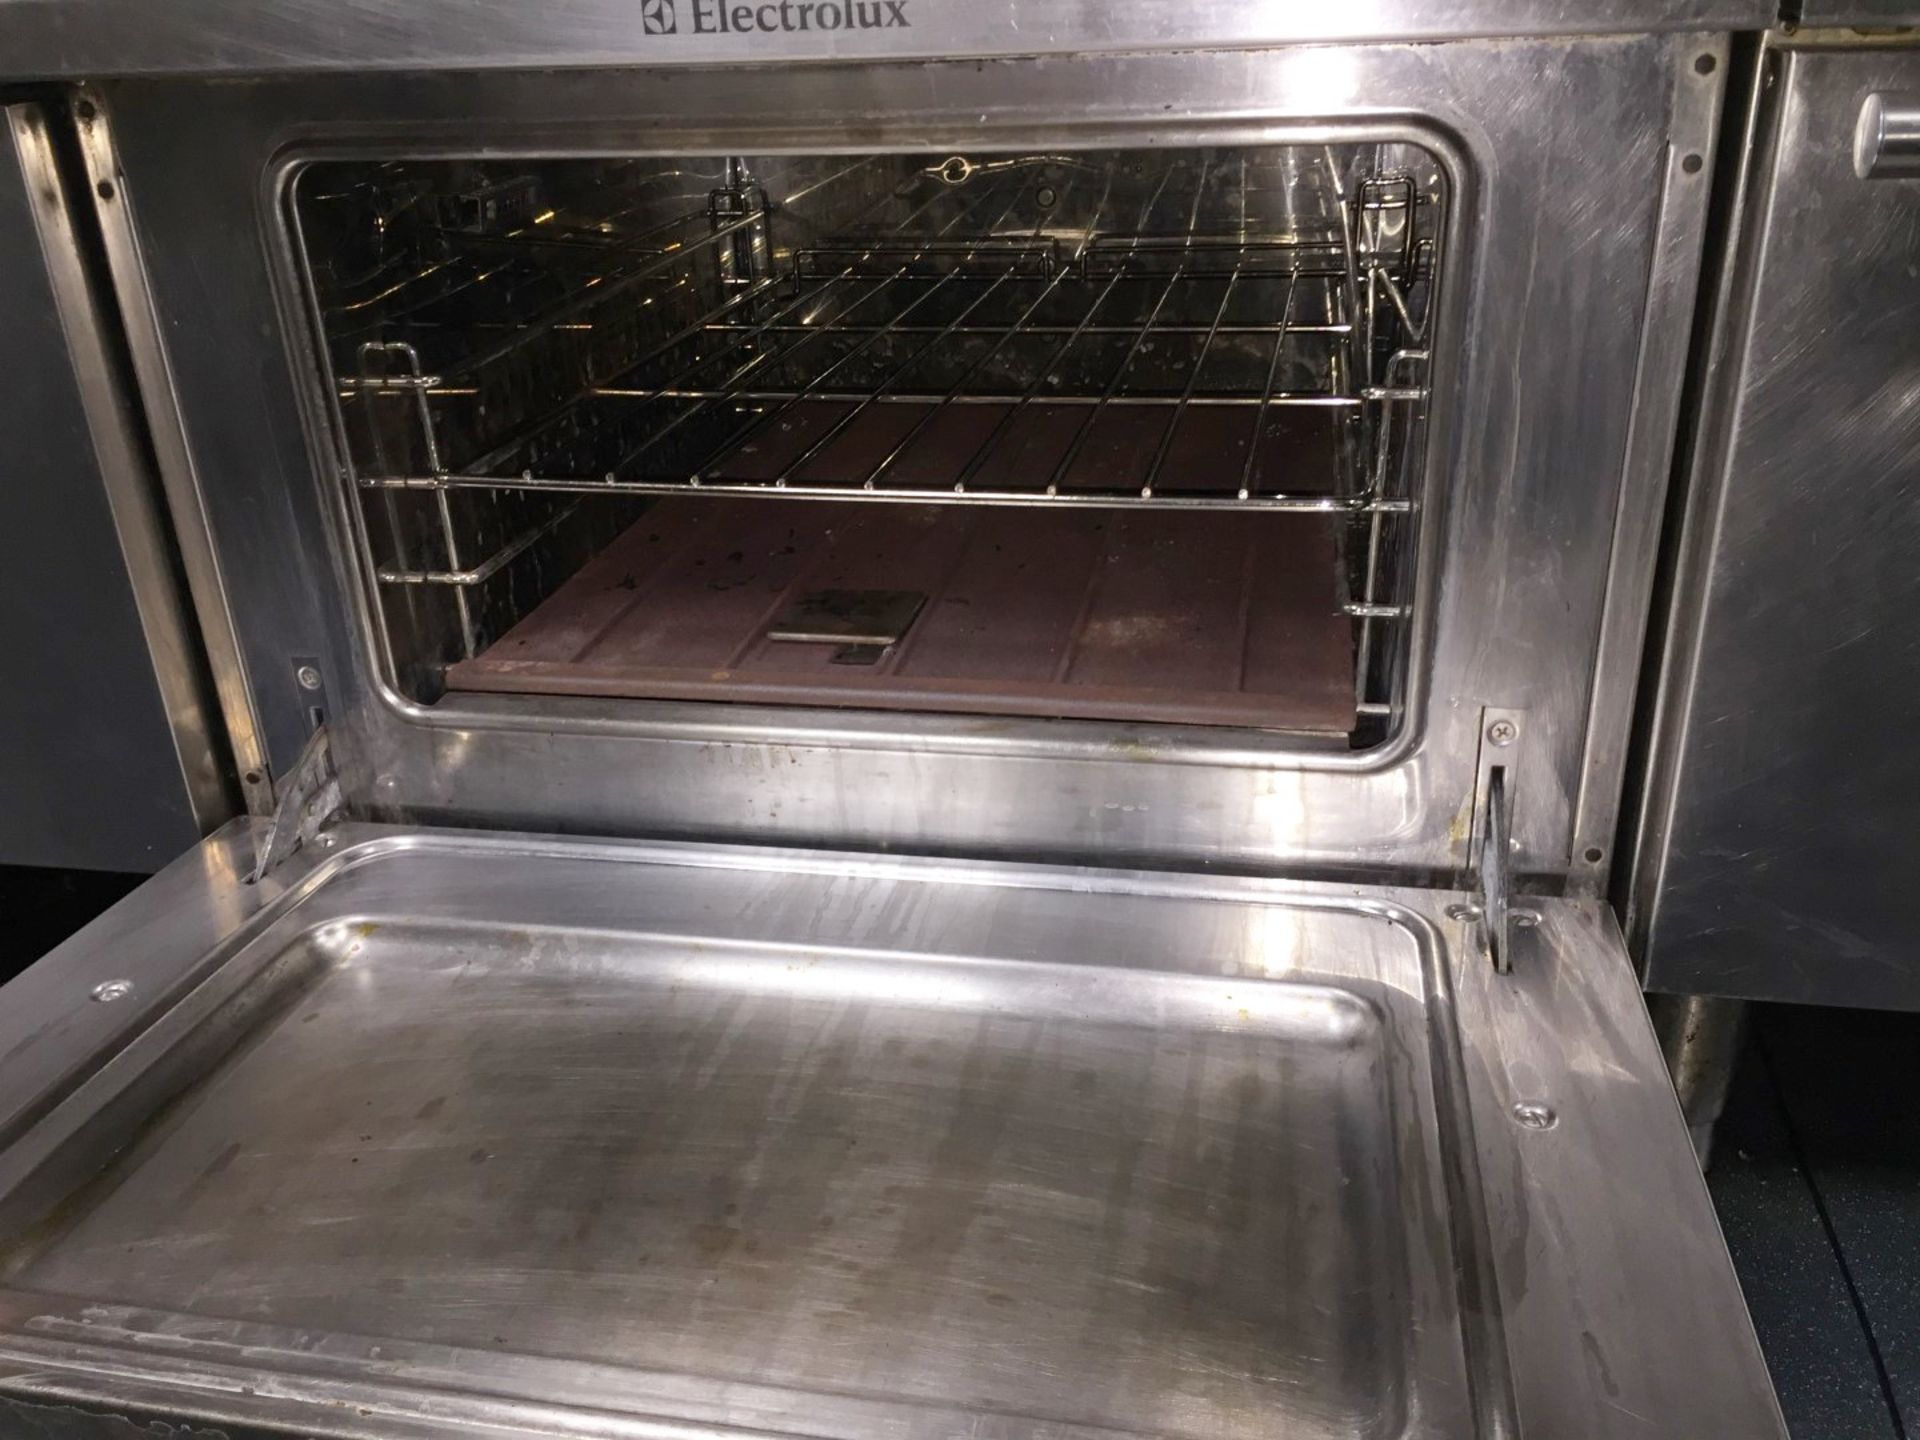 1 x Electrolux Commercial Stainless Steel Solid Top Oven With A Durable Cast-iron Cooking Surface - - Image 6 of 19